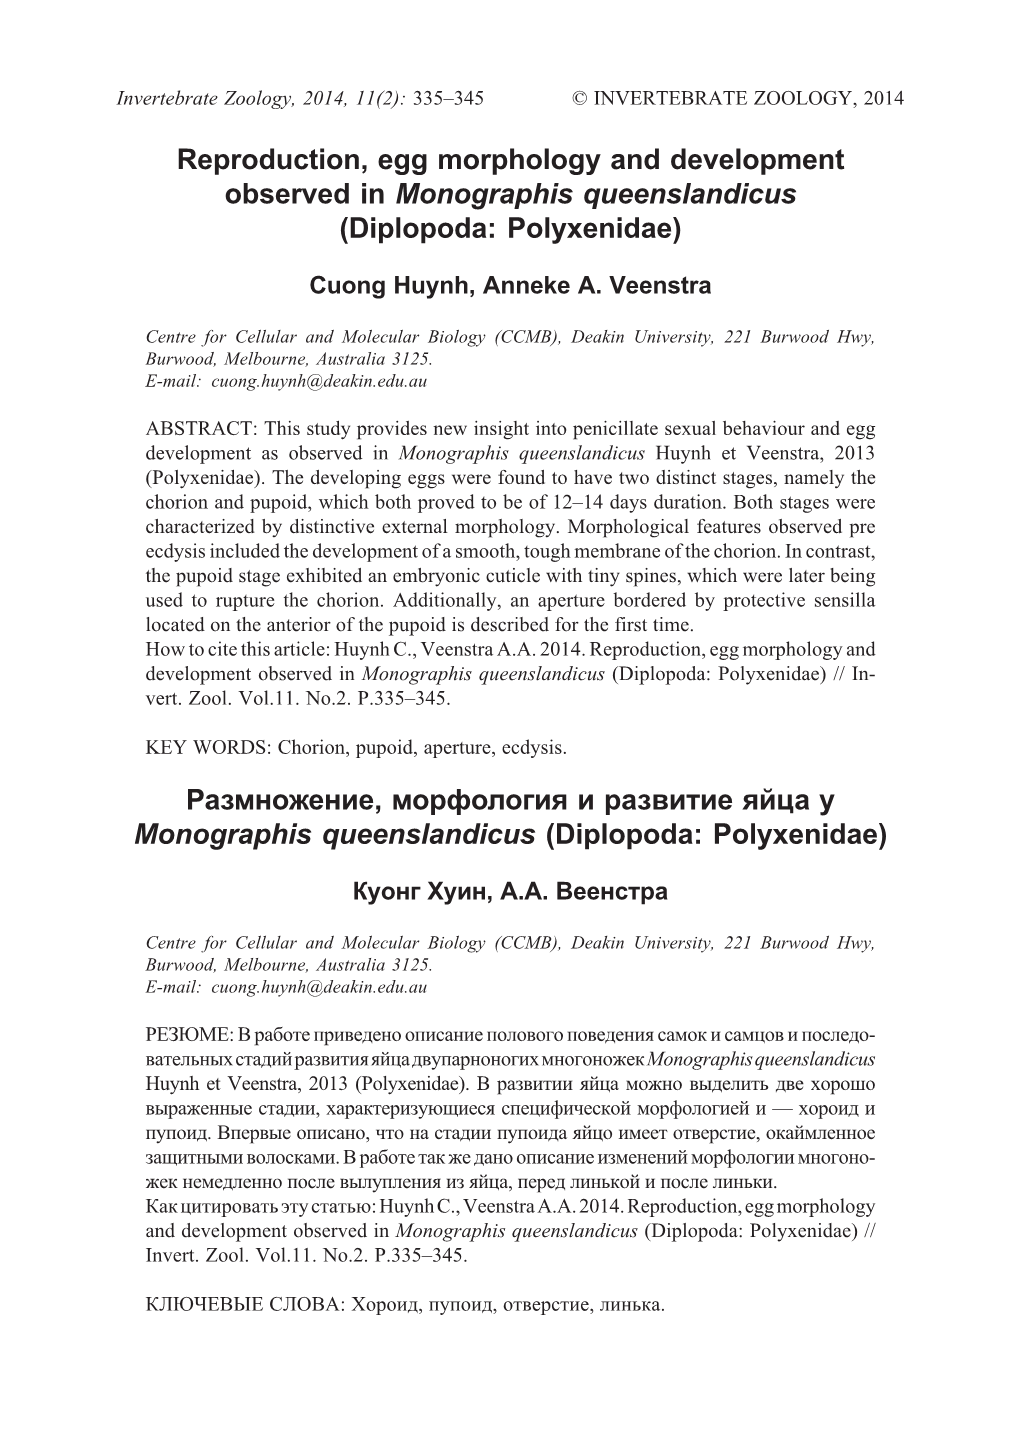 Reproduction, Egg Morphology and Development Observed in Monographis Queenslandicus (Diplopoda: Polyxenidae) Размножен